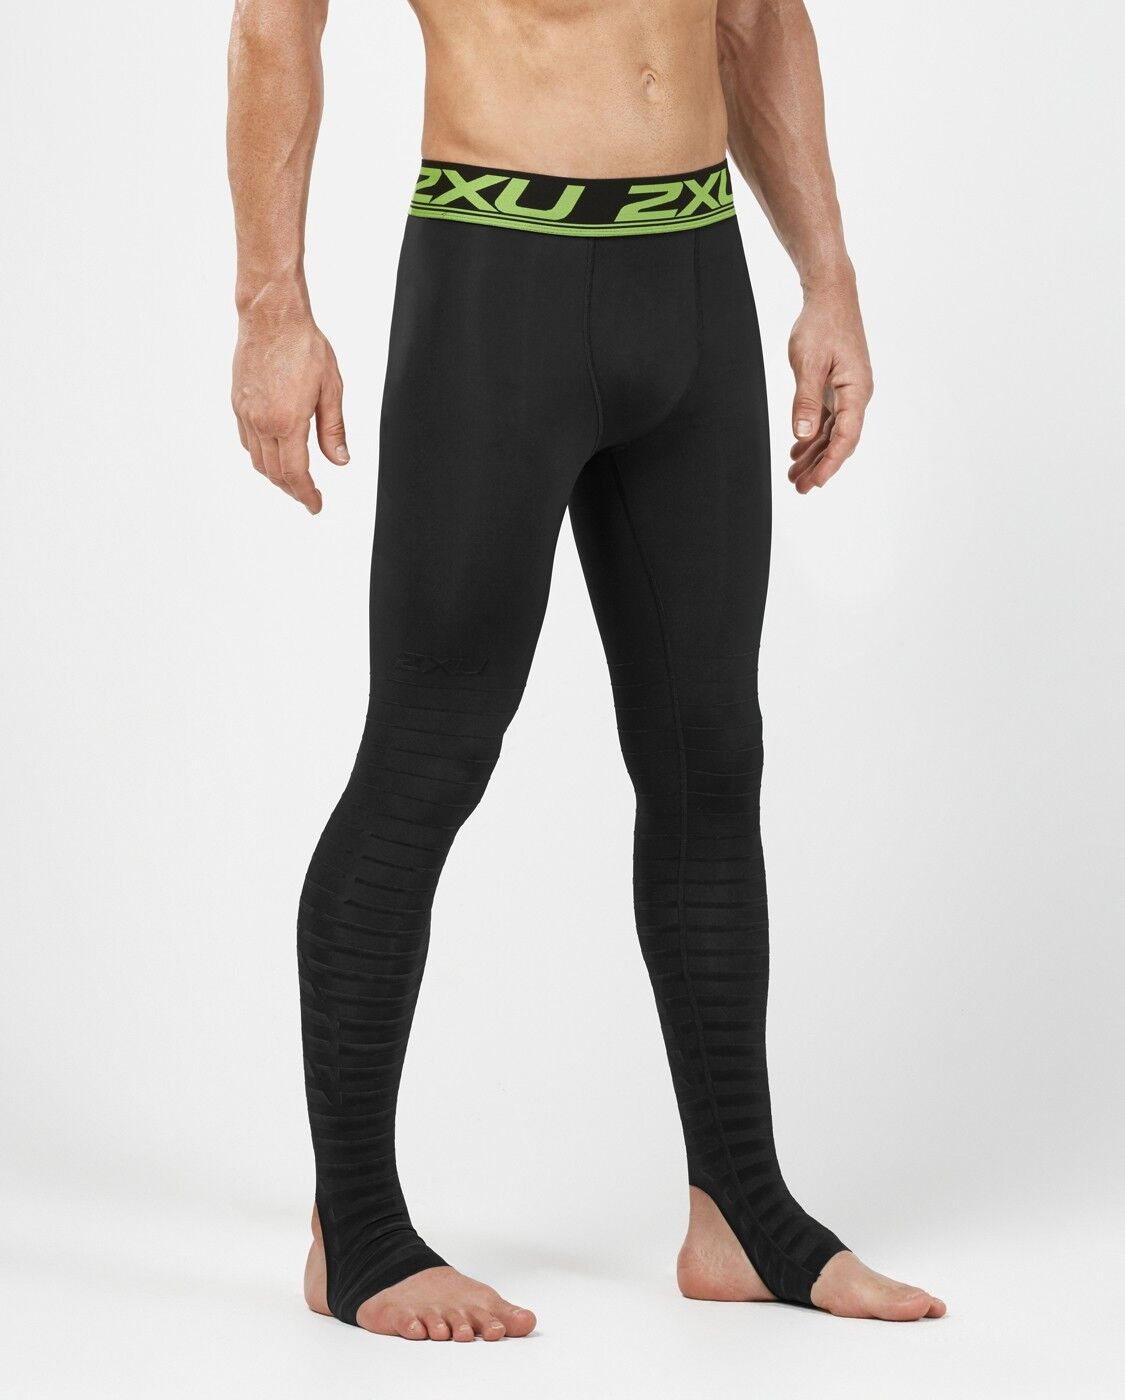 2XU Power Recovery Compr Tights - Black/Nero - Cyclop.in